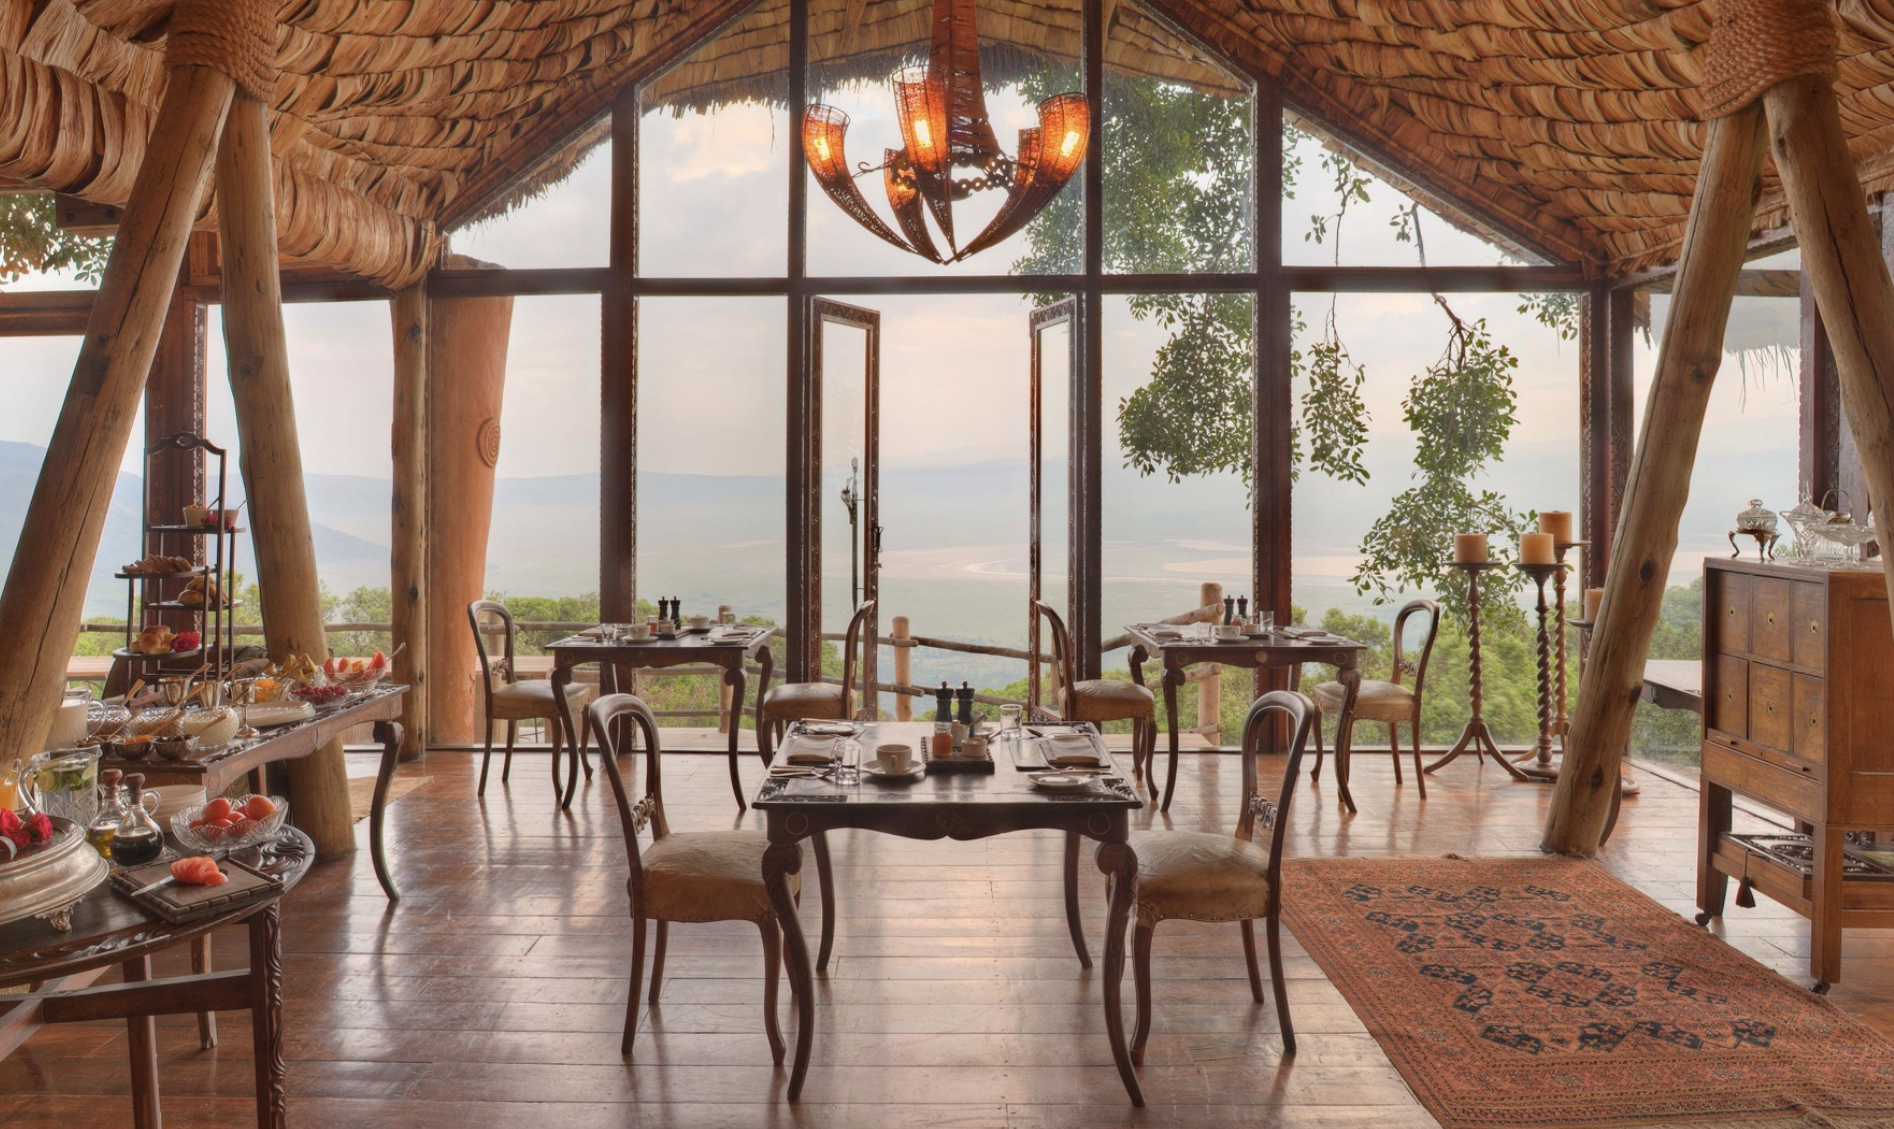 Indoor dining at the andBeyond Ngorongoro Crater Lodge in Tanzania, Africa